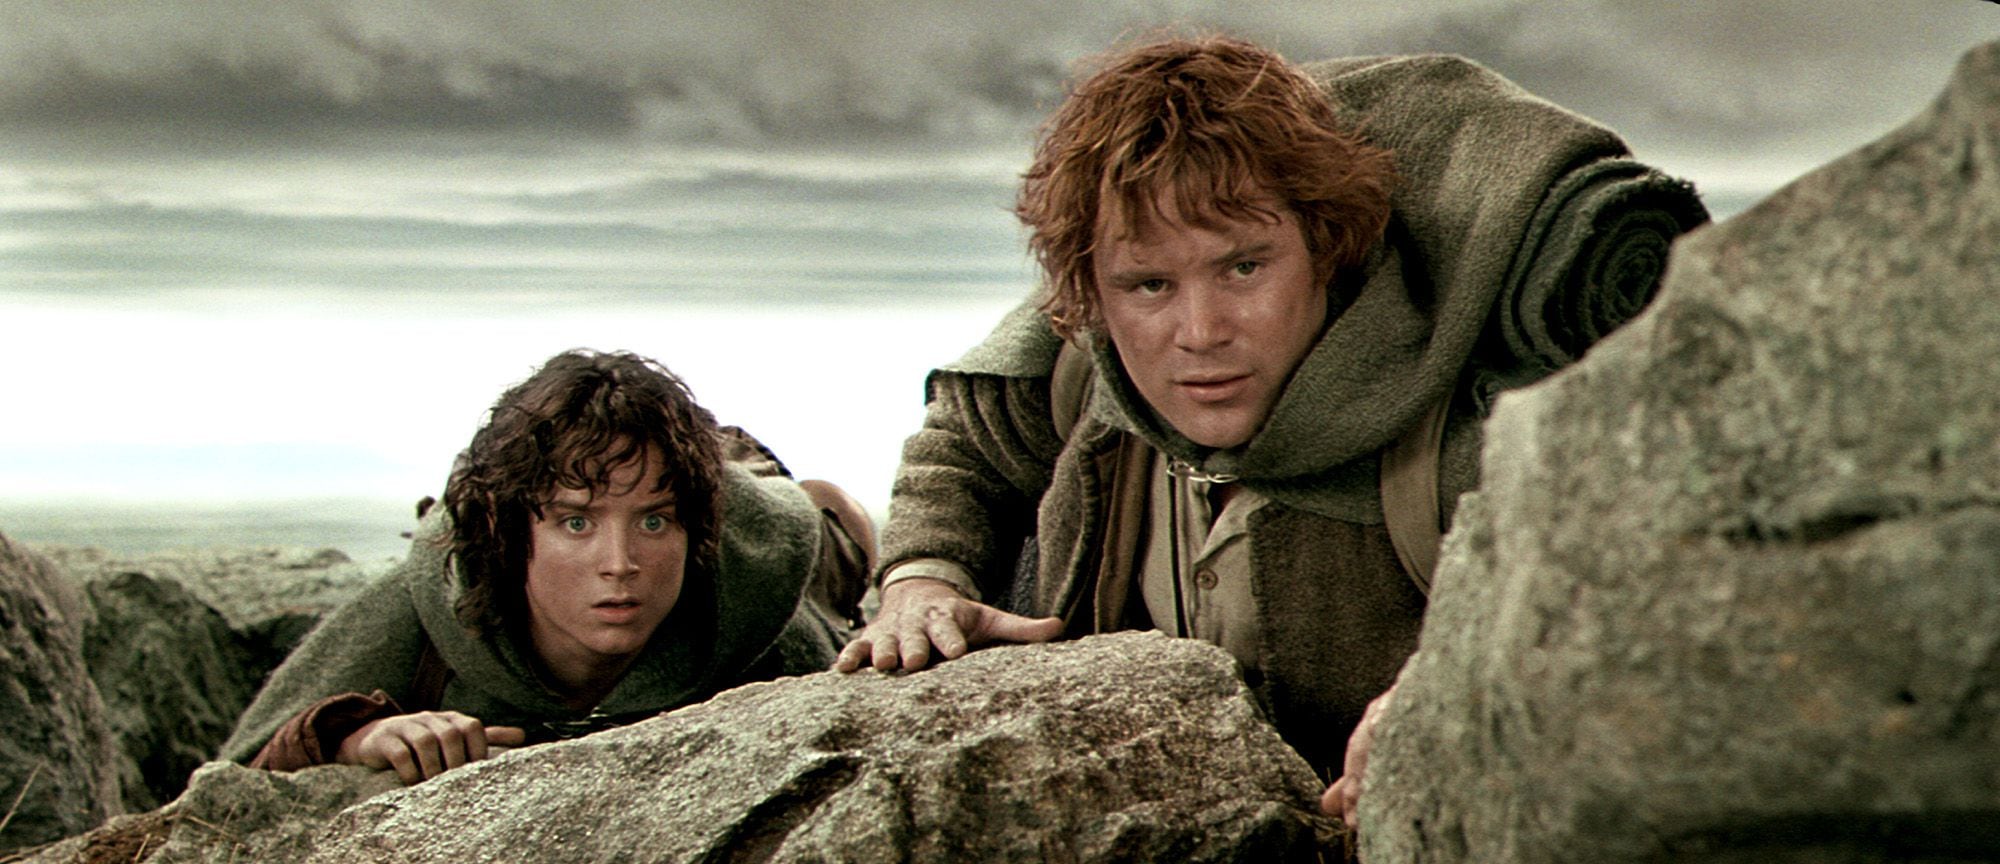 ** FILE **Actors Elijah Wood as Frodo, left, and  Sean Astin as Sam, appear in a scene from New Line Cinemas "The Lord of the Rings: The Two Towers," in this undated promotional photo. The film was nominated for best picture in the Academy Award nominations announced Tuesday, Feb. 11, 2003. The winners will be announced March 23, 2003, at the 75th Academy Awards in Hollywood, Calif. (AP Photo/Pierre Vinet, New Line Cinema)